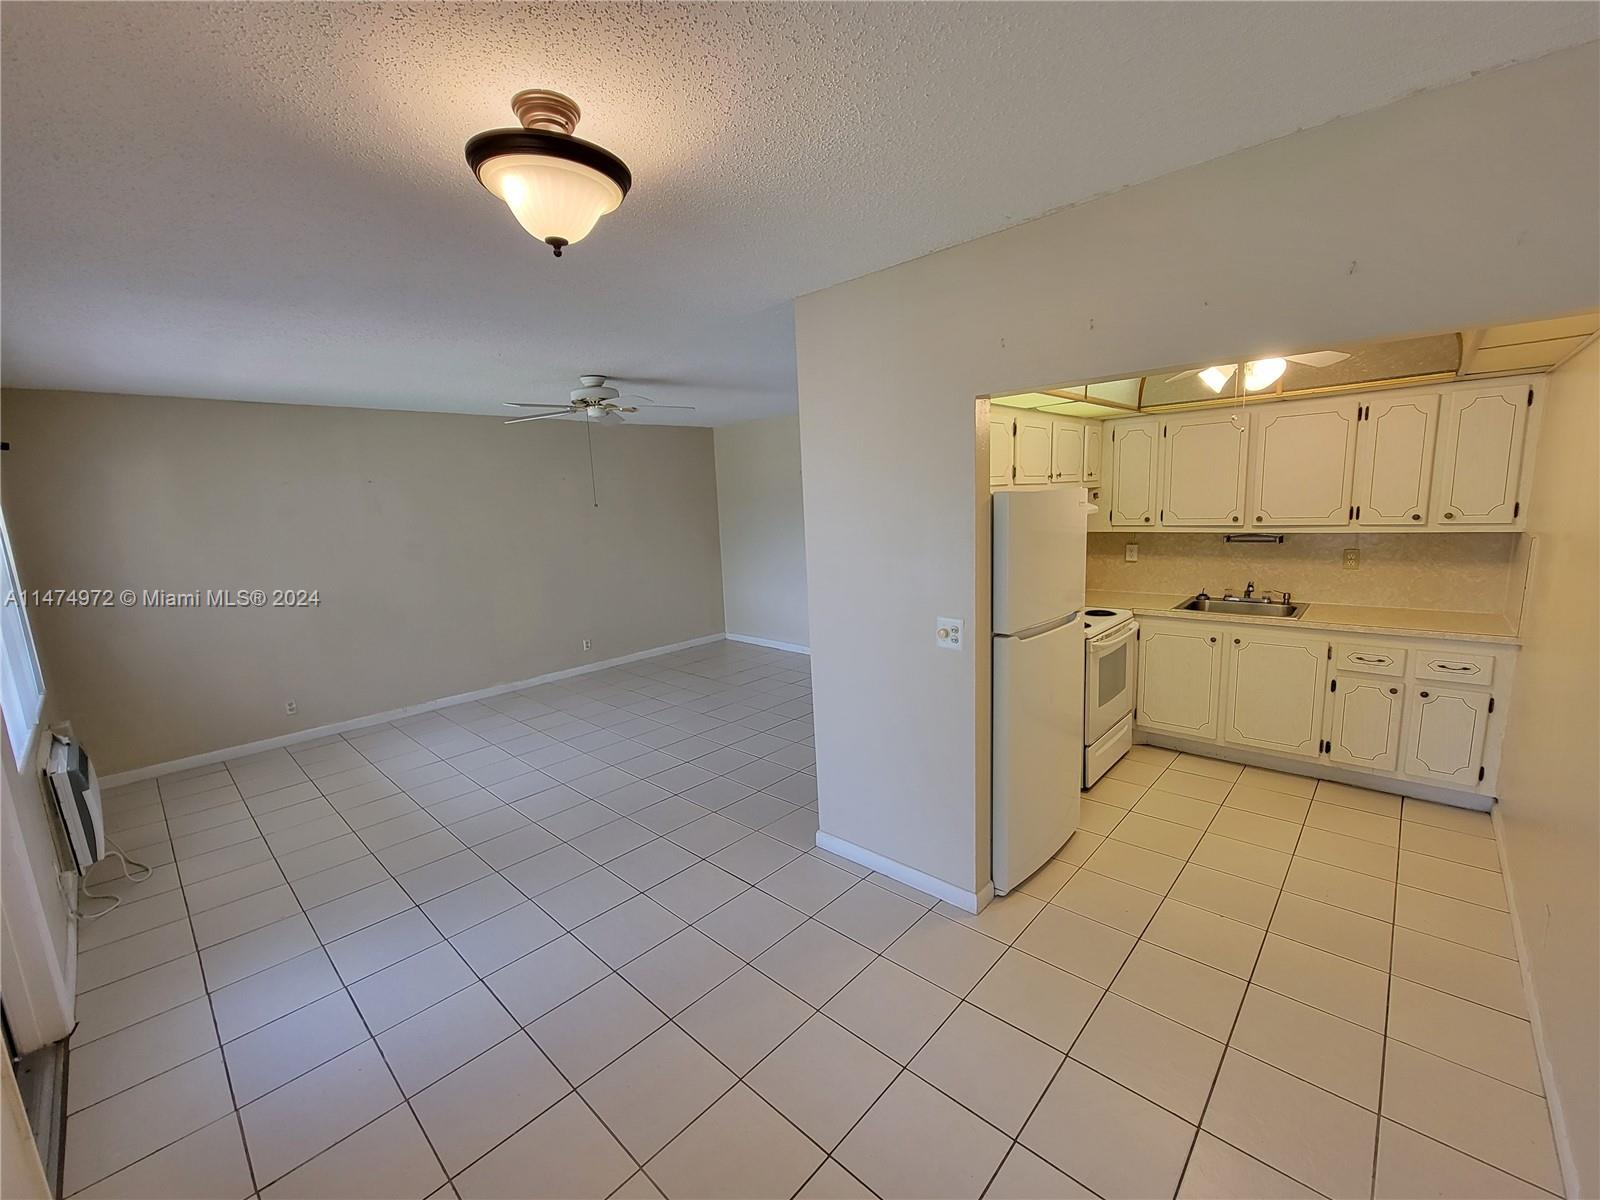 Rental Property at 238 Norwich J 238, West Palm Beach, Palm Beach County, Florida - Bedrooms: 2 
Bathrooms: 2  - $1,250 MO.